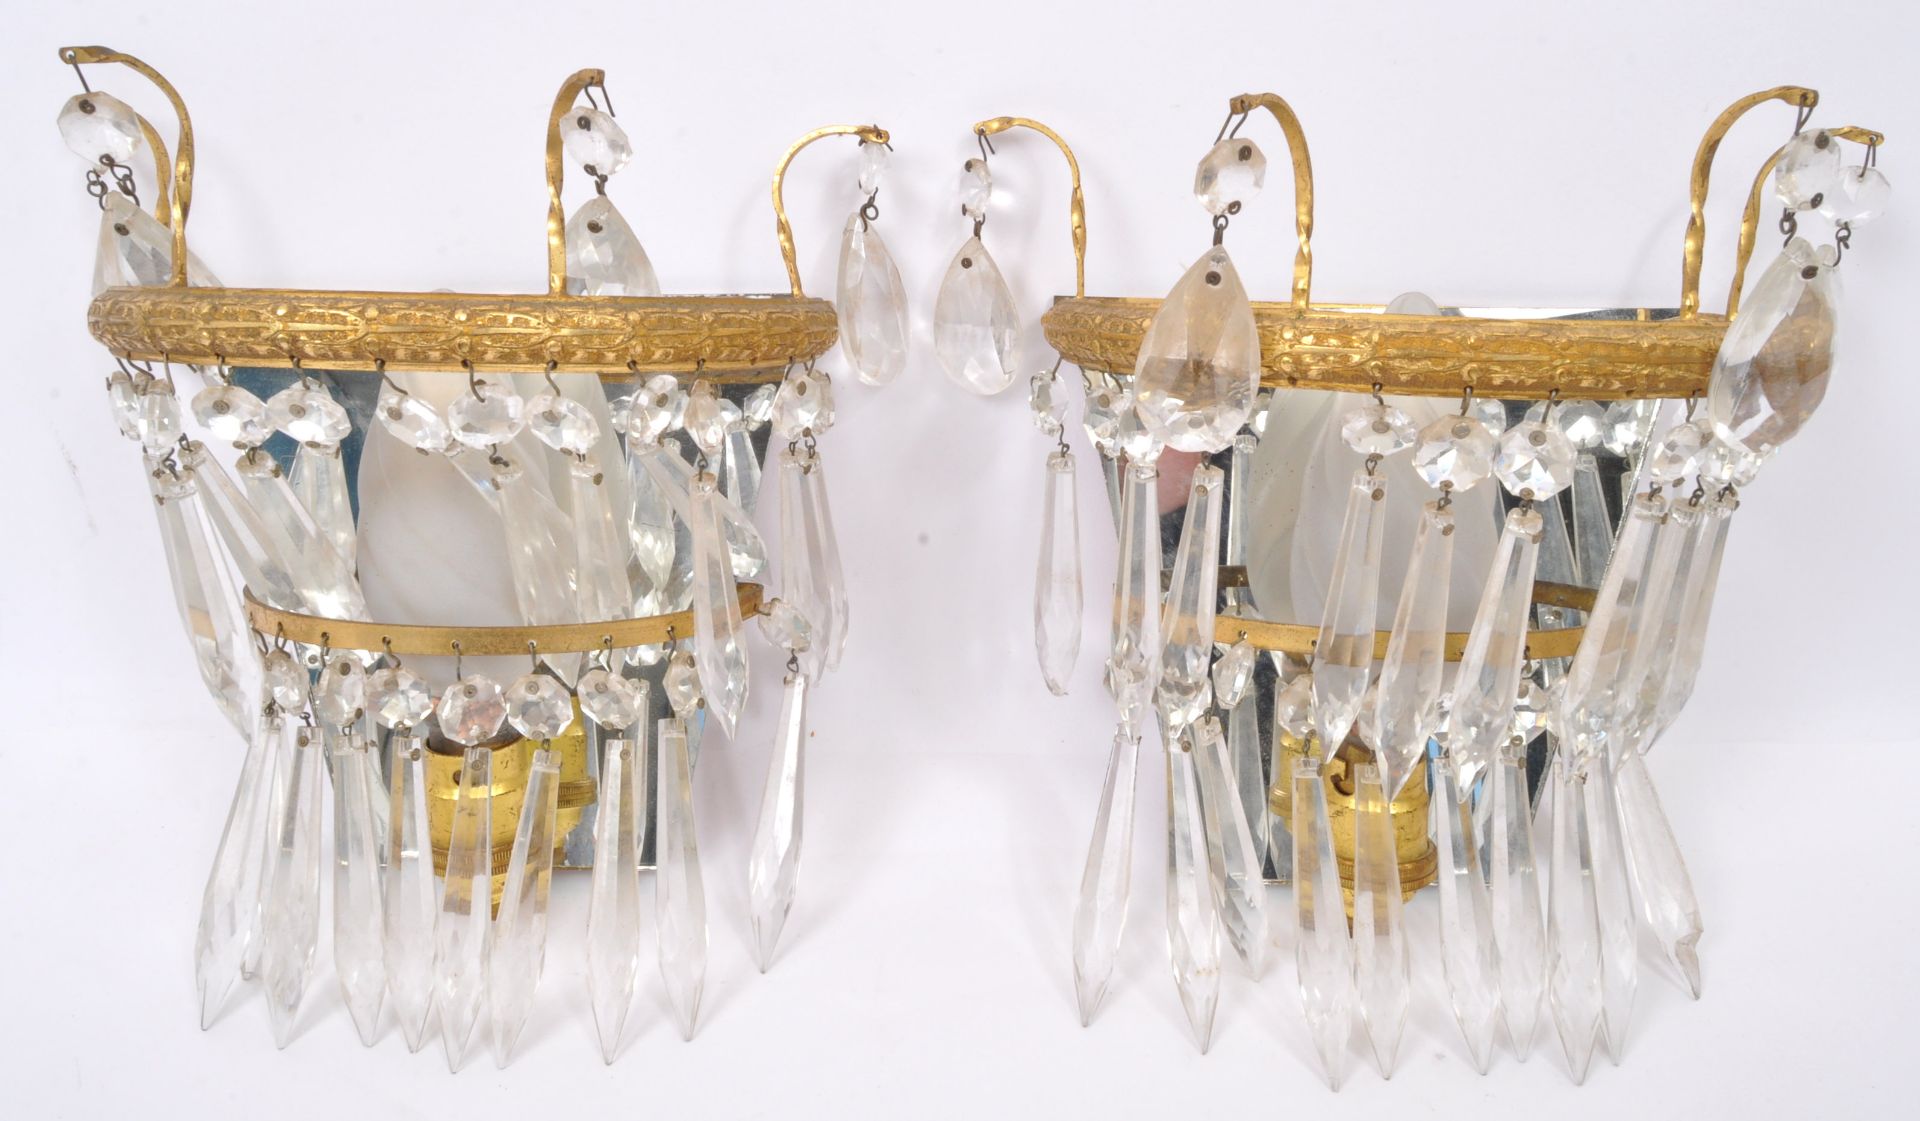 PAIR OF EARLY 20TH CENTURY GILT METAL WALL LIGHTS - Image 6 of 6